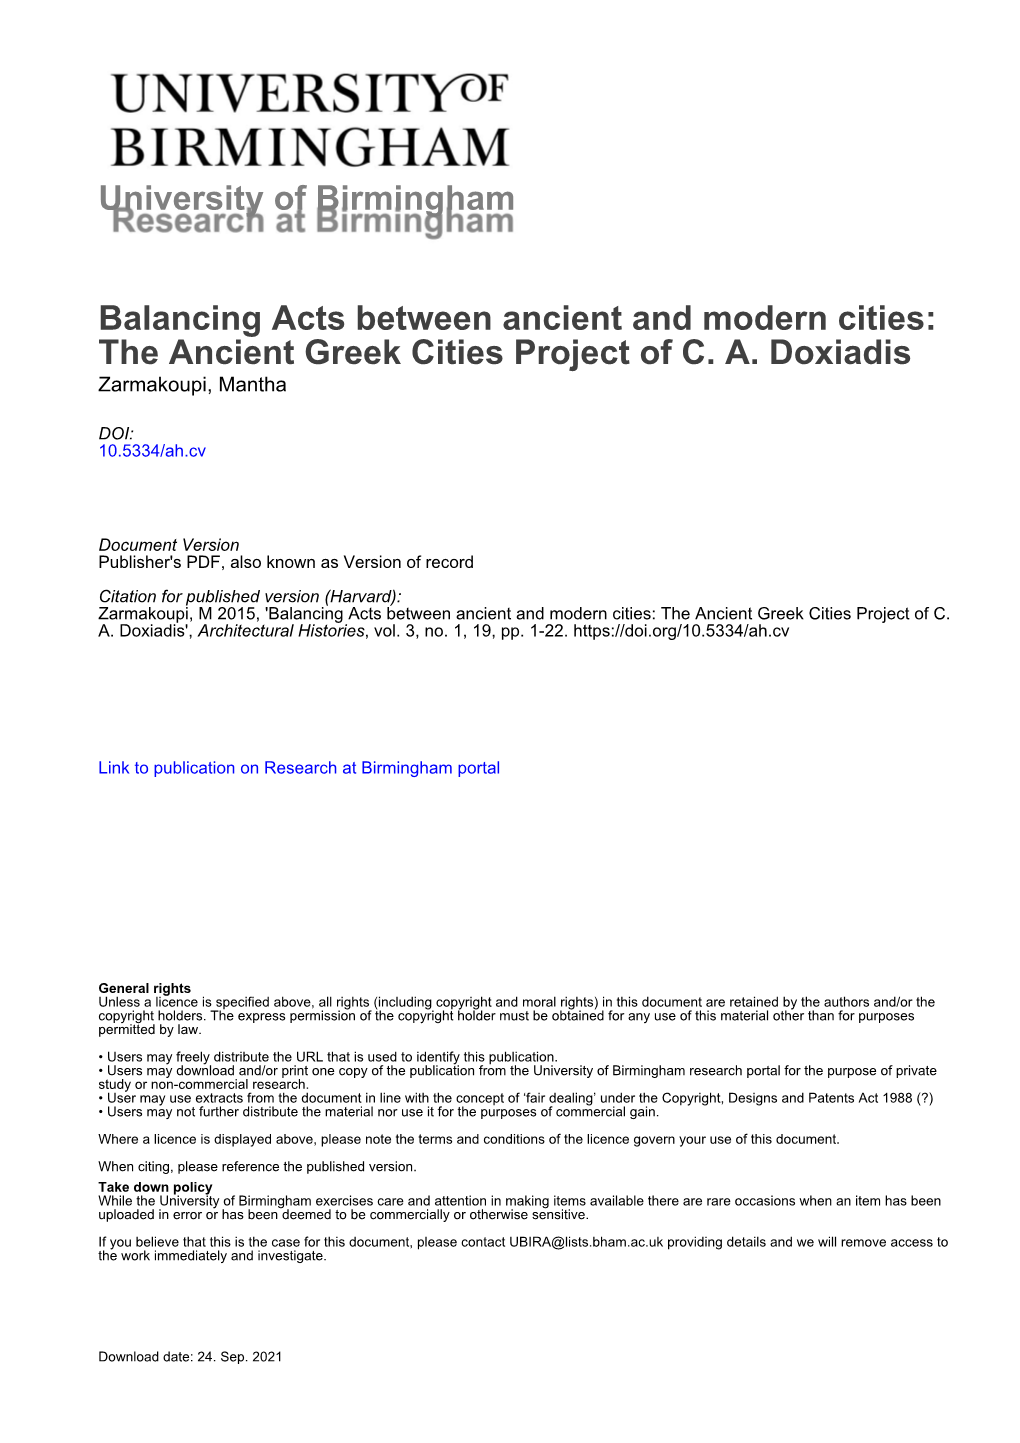 The Ancient Greek Cities Project of CA Doxiadis